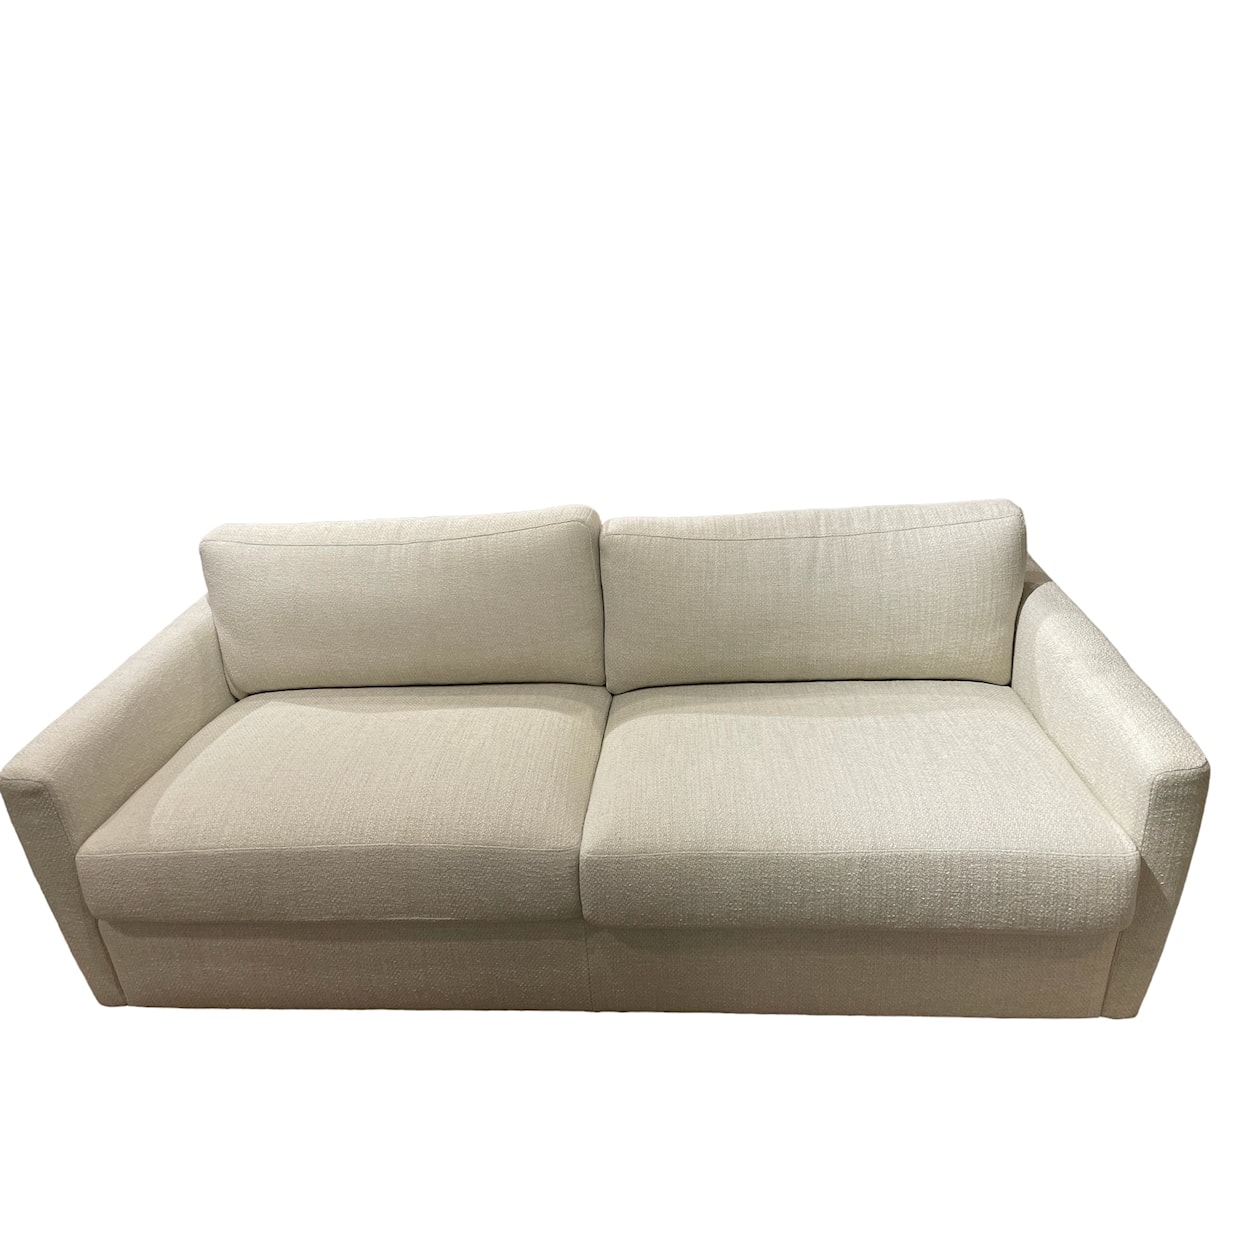 American Leather Sofas and Sectionals Carmet Sofa